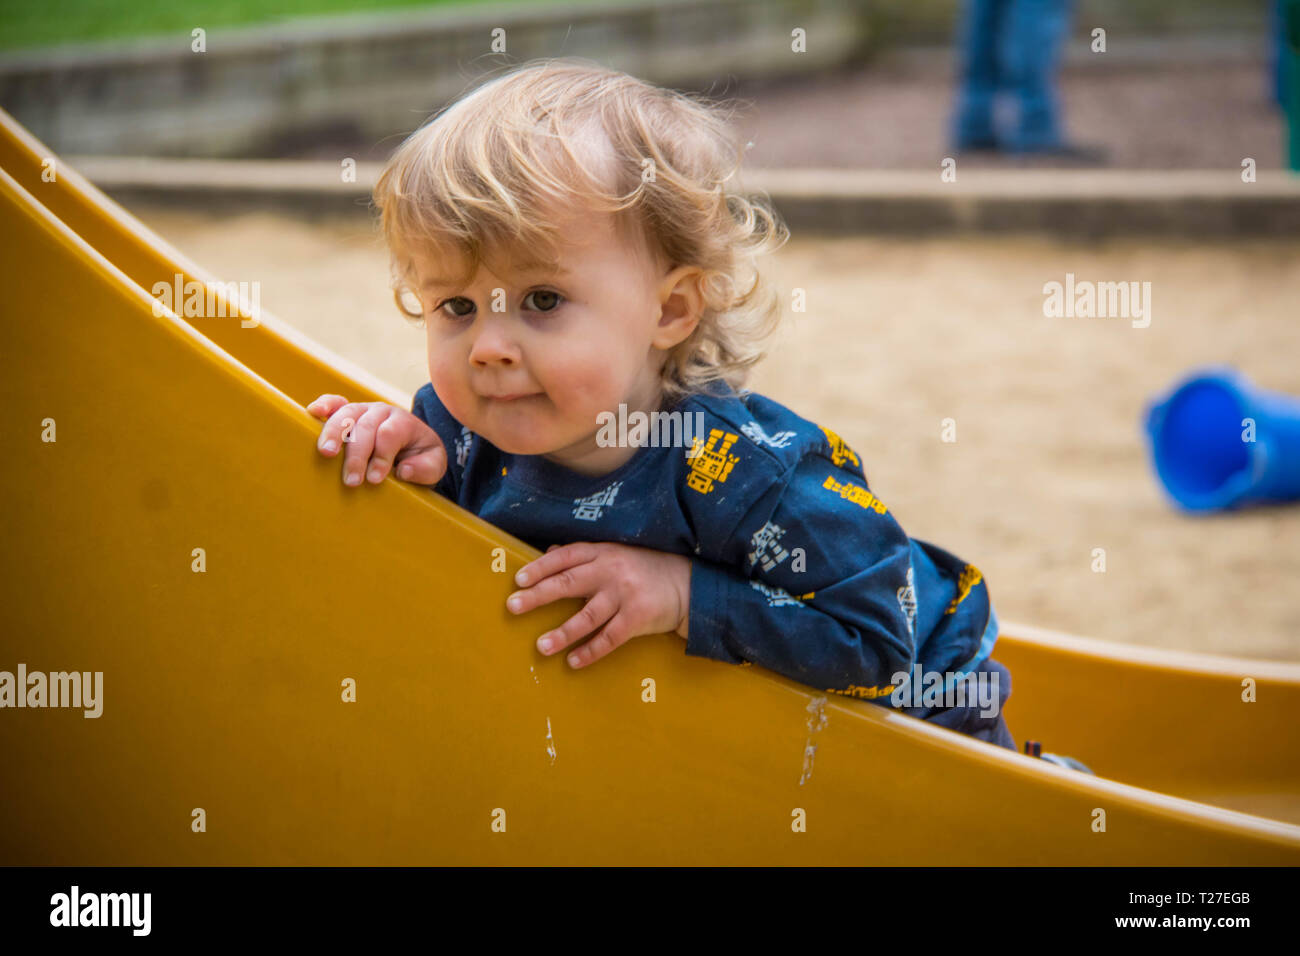 My son playing and growing up Stock Photo